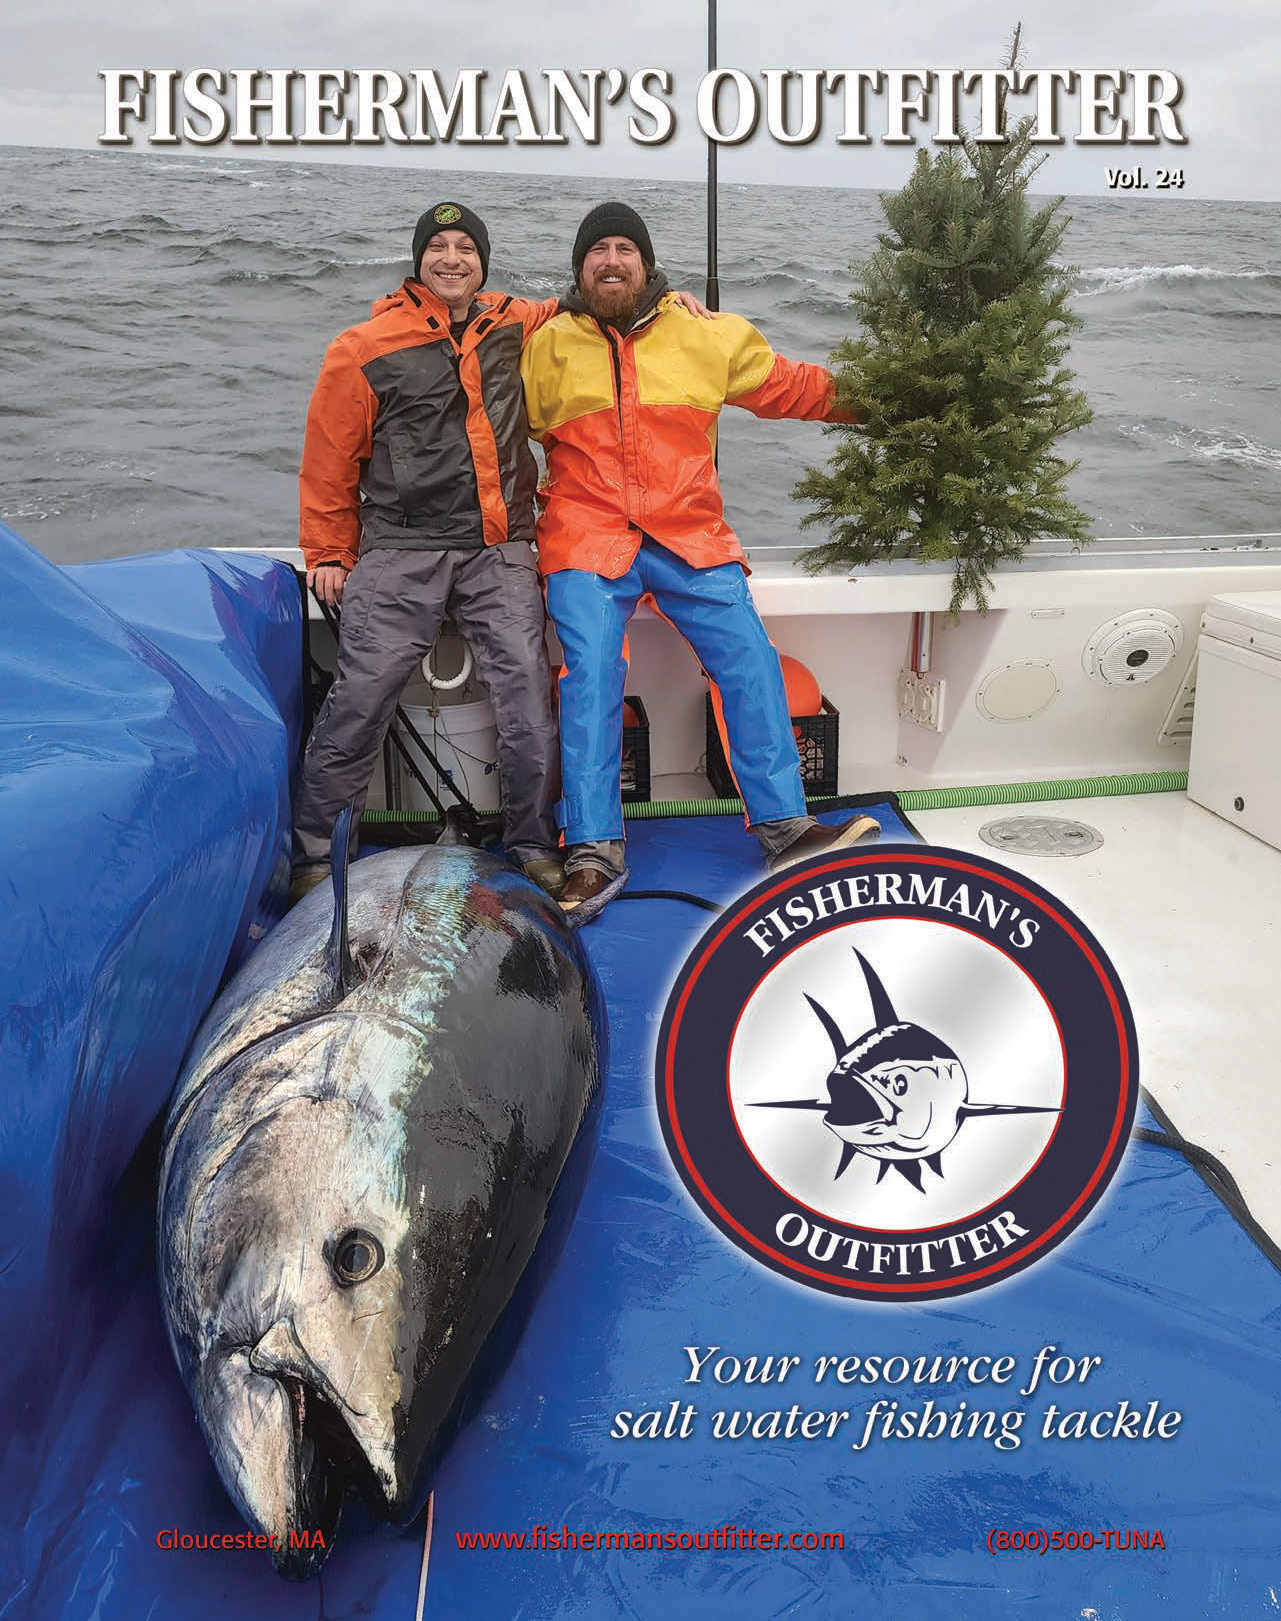 Bluefin Tuna Fishing Archives - Fisherman's Outfitter